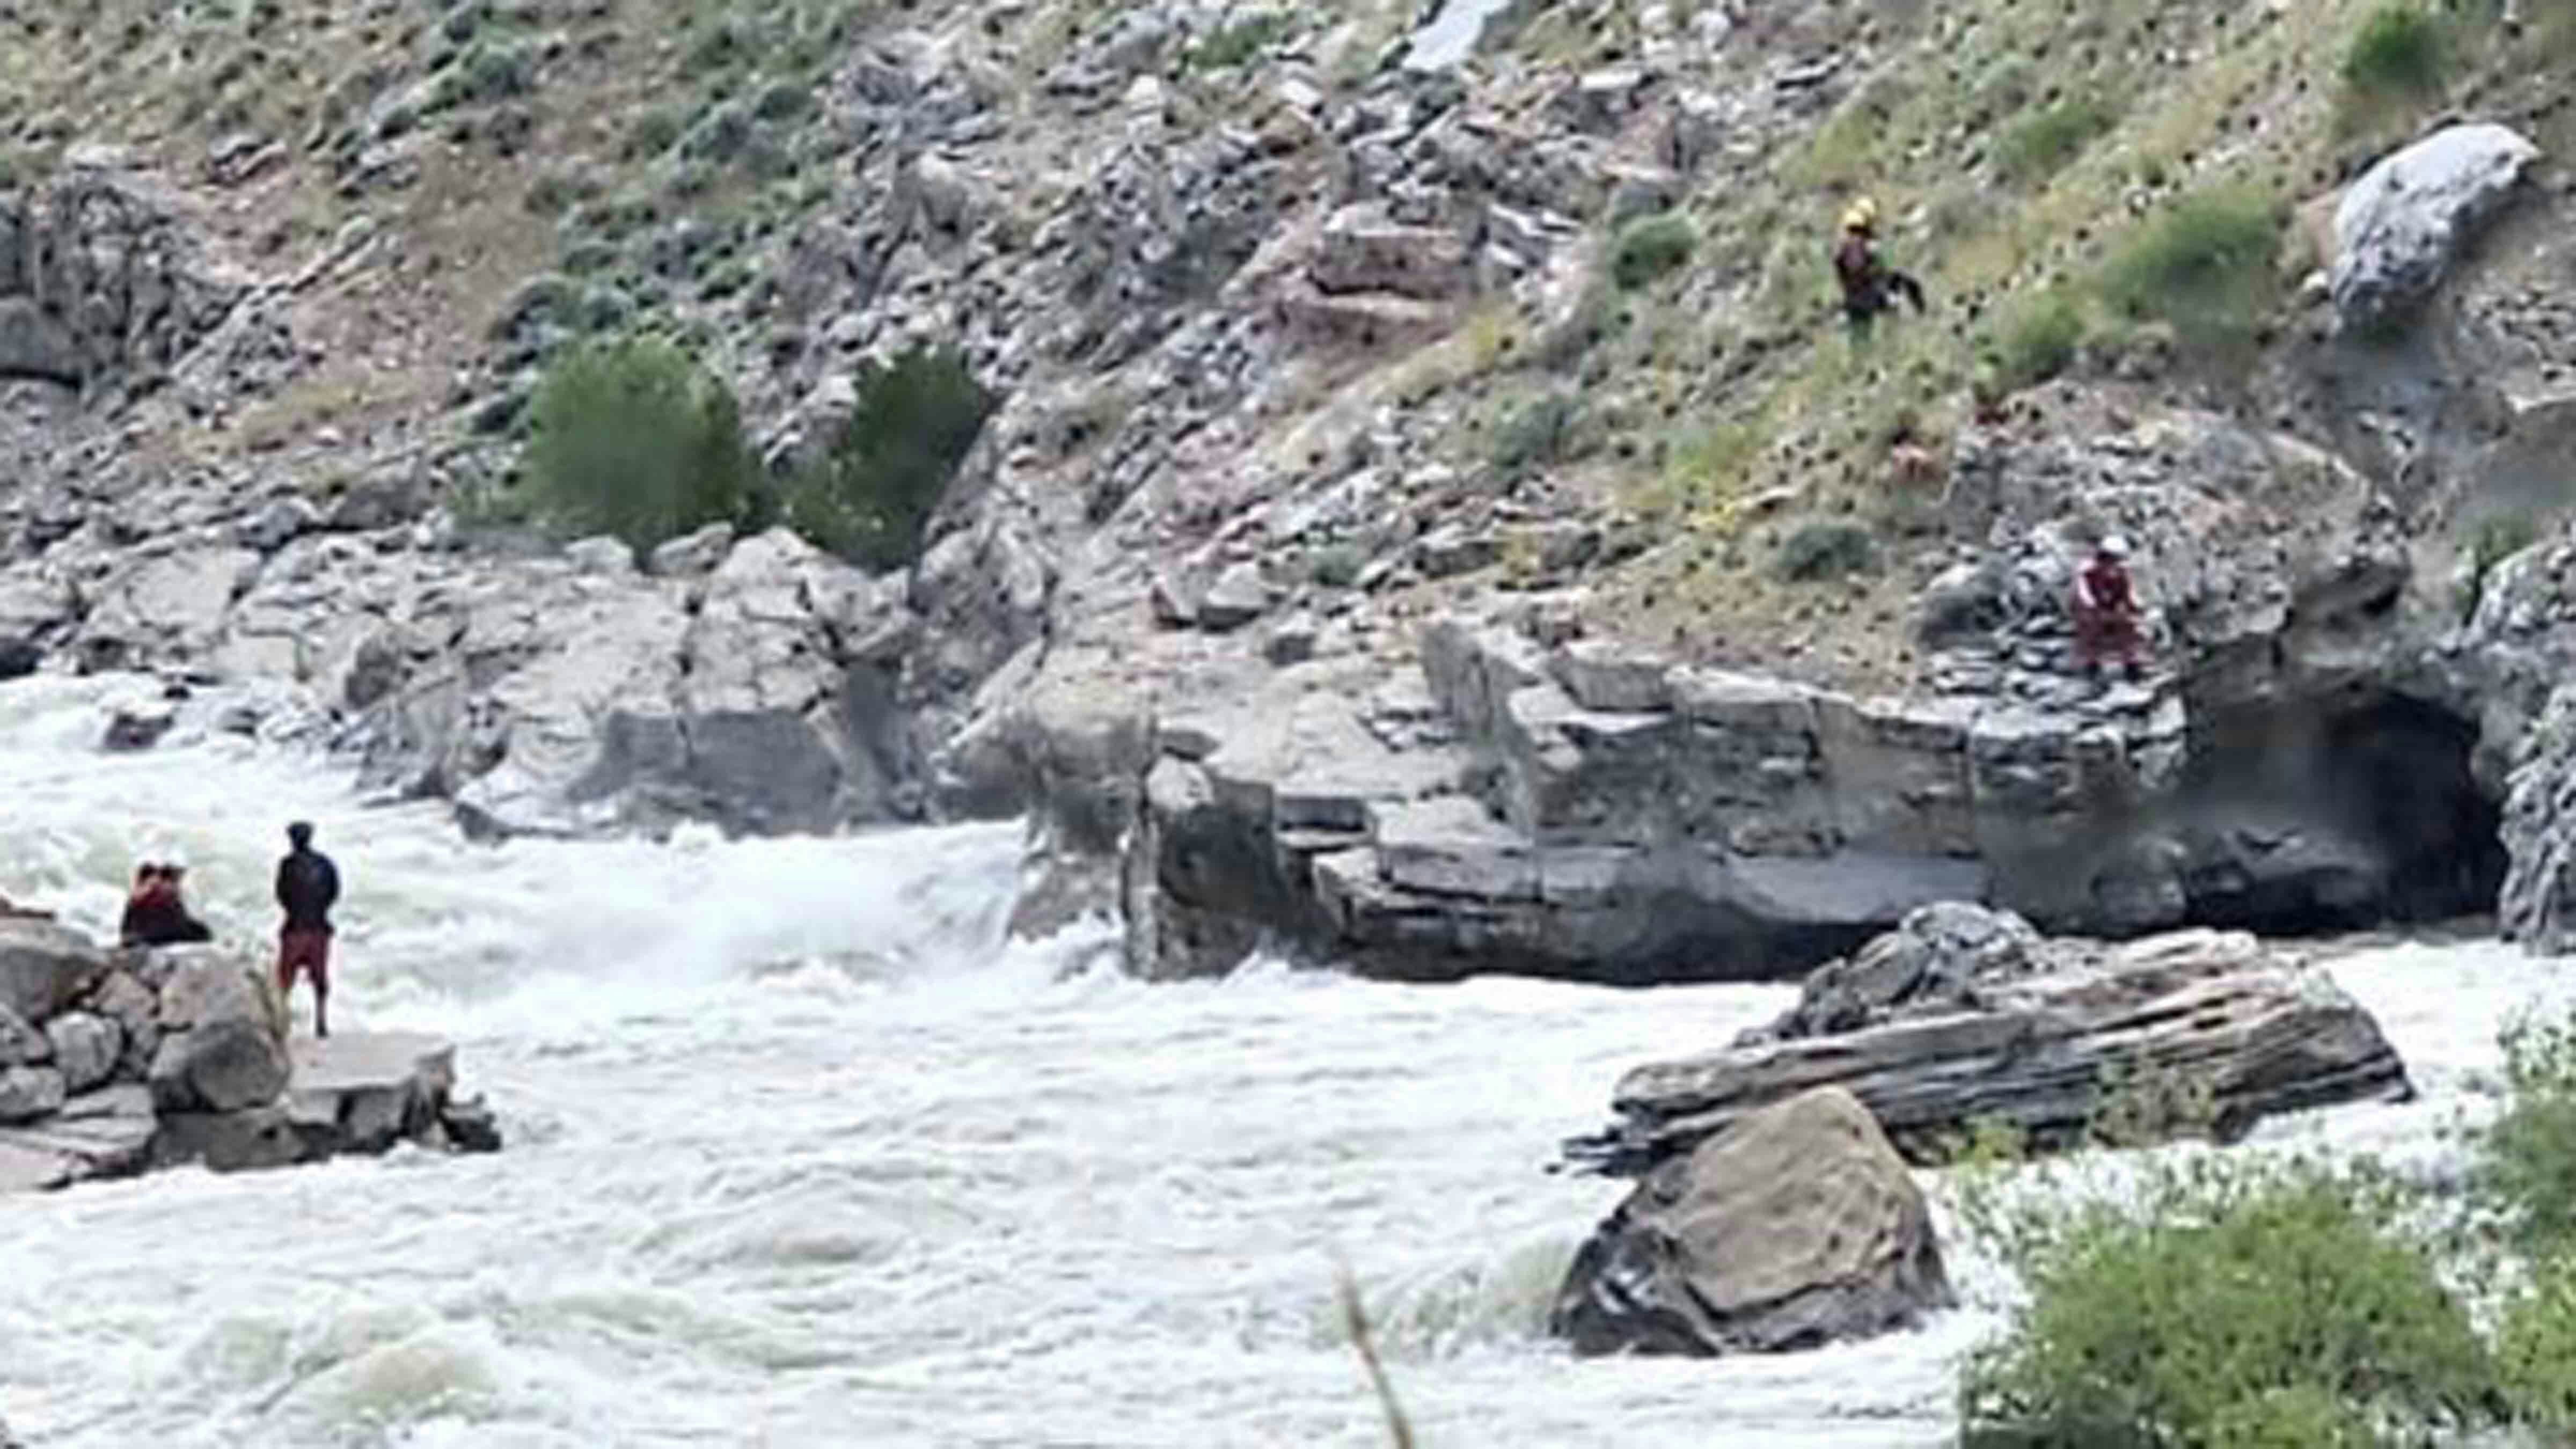 Park County Search And Rescue personnel were assisted by civilian kayakers on Sunday, rescuing a West Texas man who was trapped in this eddy and cave on the Shoshone River after the raft his was riding in with two others flipped. He found refuge in this little cave to the right.